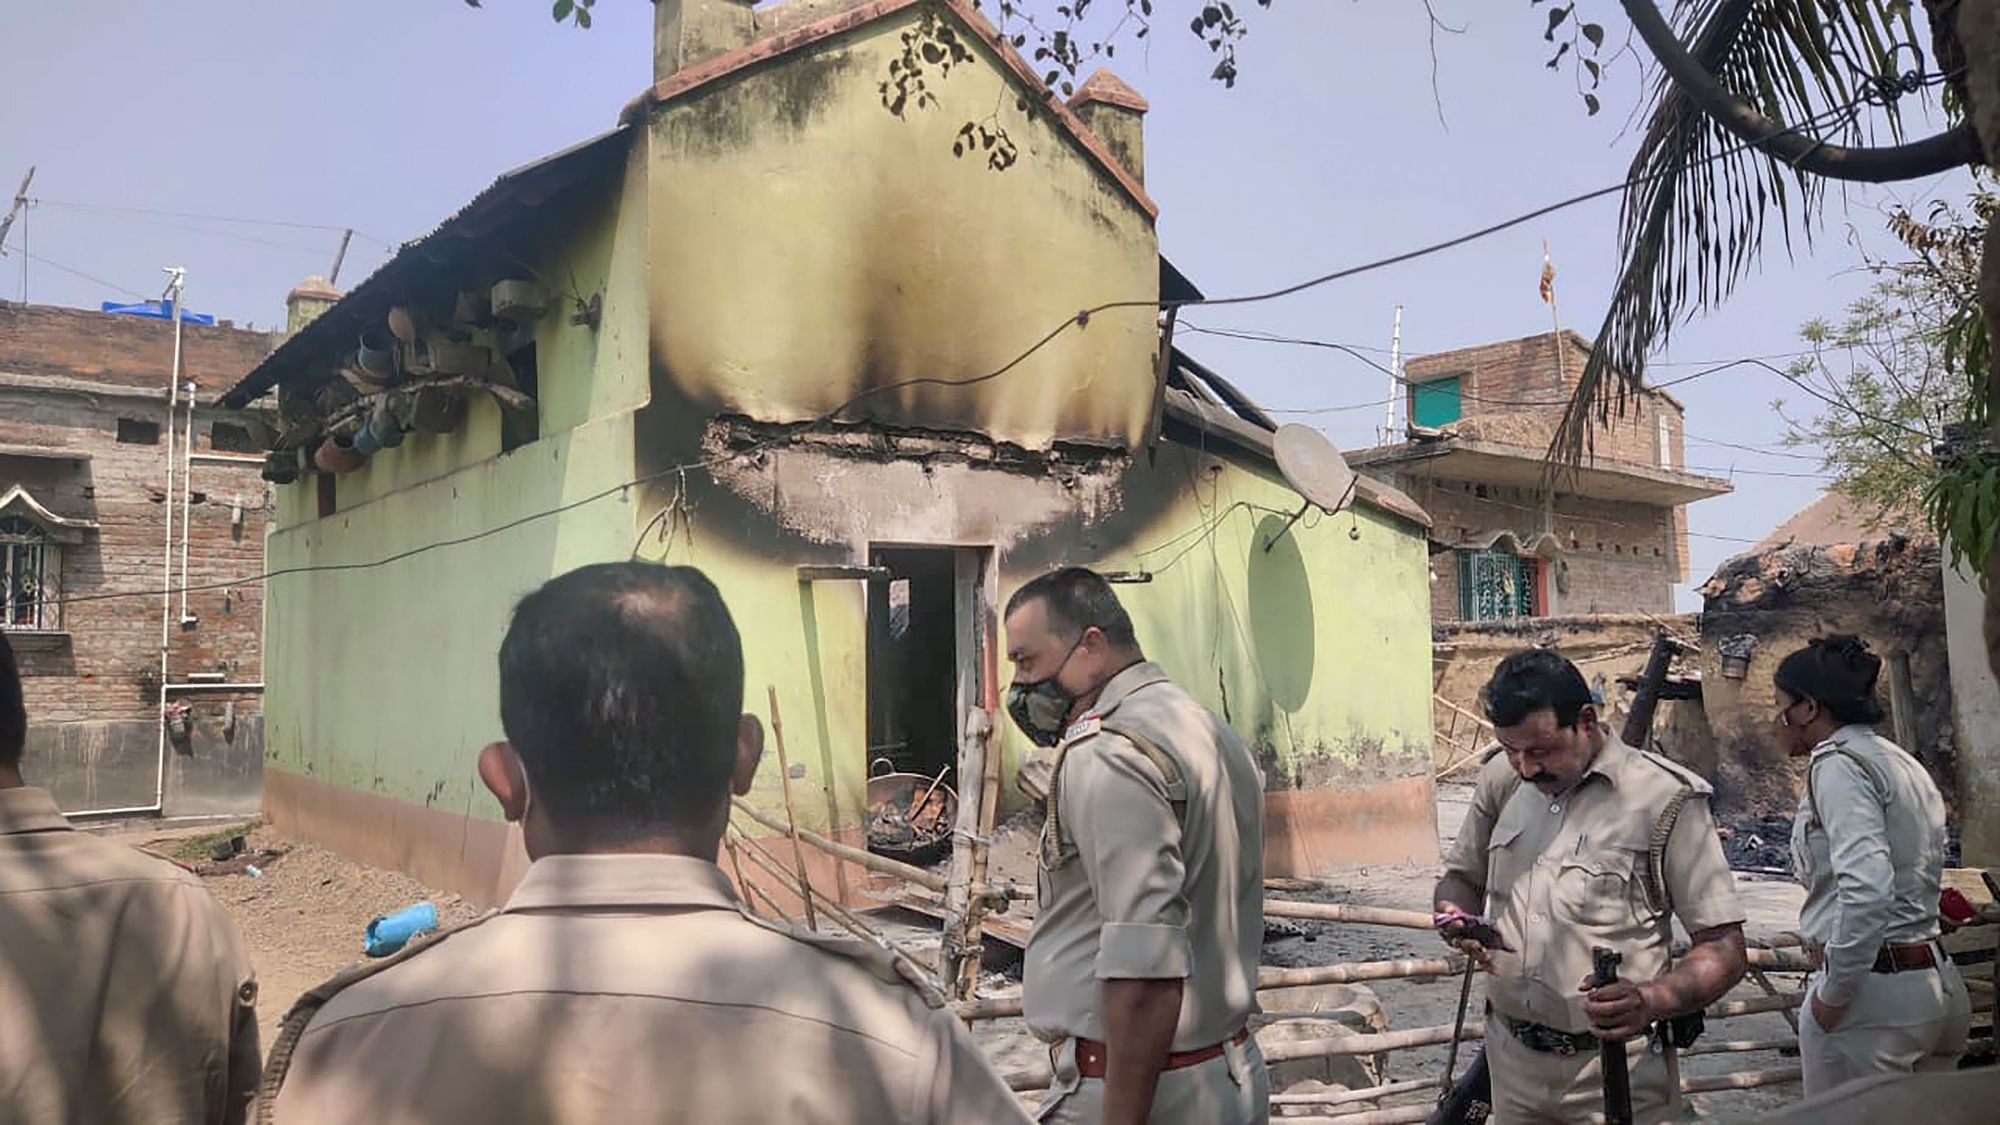 <div class="paragraphs"><p>Charred bodies of eight people were recovered from Rampurhat in <a href="https://www.thequint.com/news/india/bodies-found-burnt-houses-protests-birbhum-west-bengal">Birbhum</a> district after nearly 10-12 houses were set ablaze, the police said.</p></div>